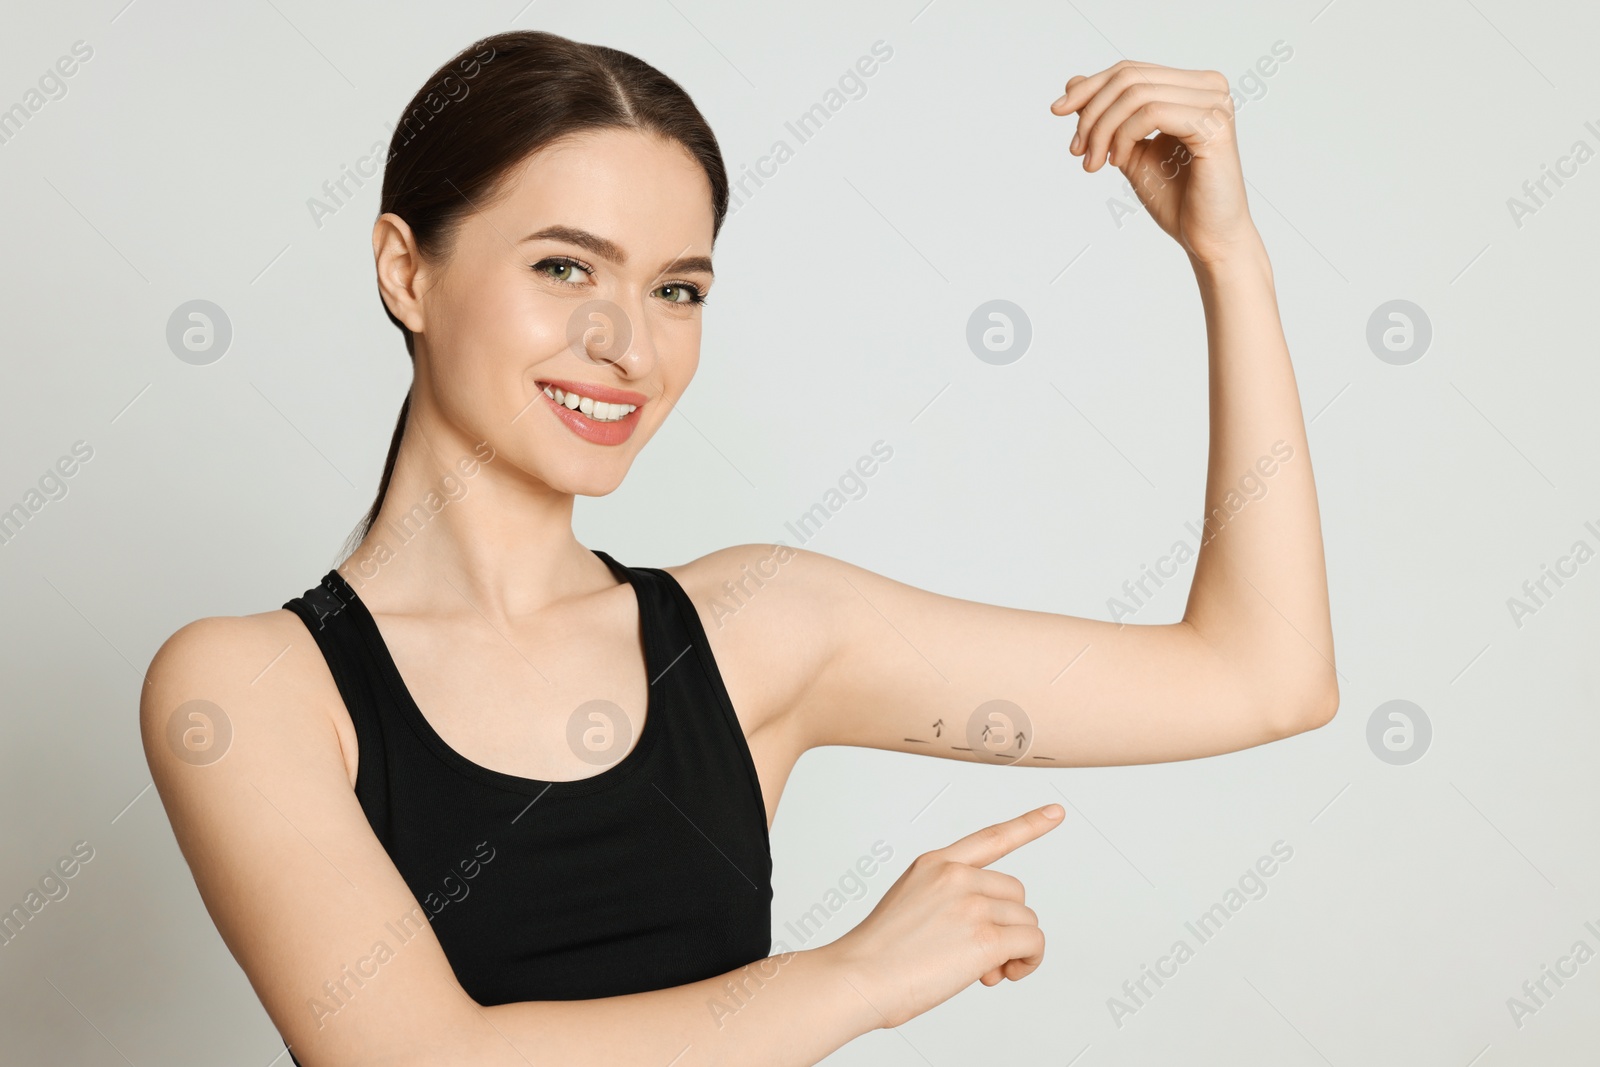 Photo of Slim young woman with marks on arm against light background. Weight loss surgery